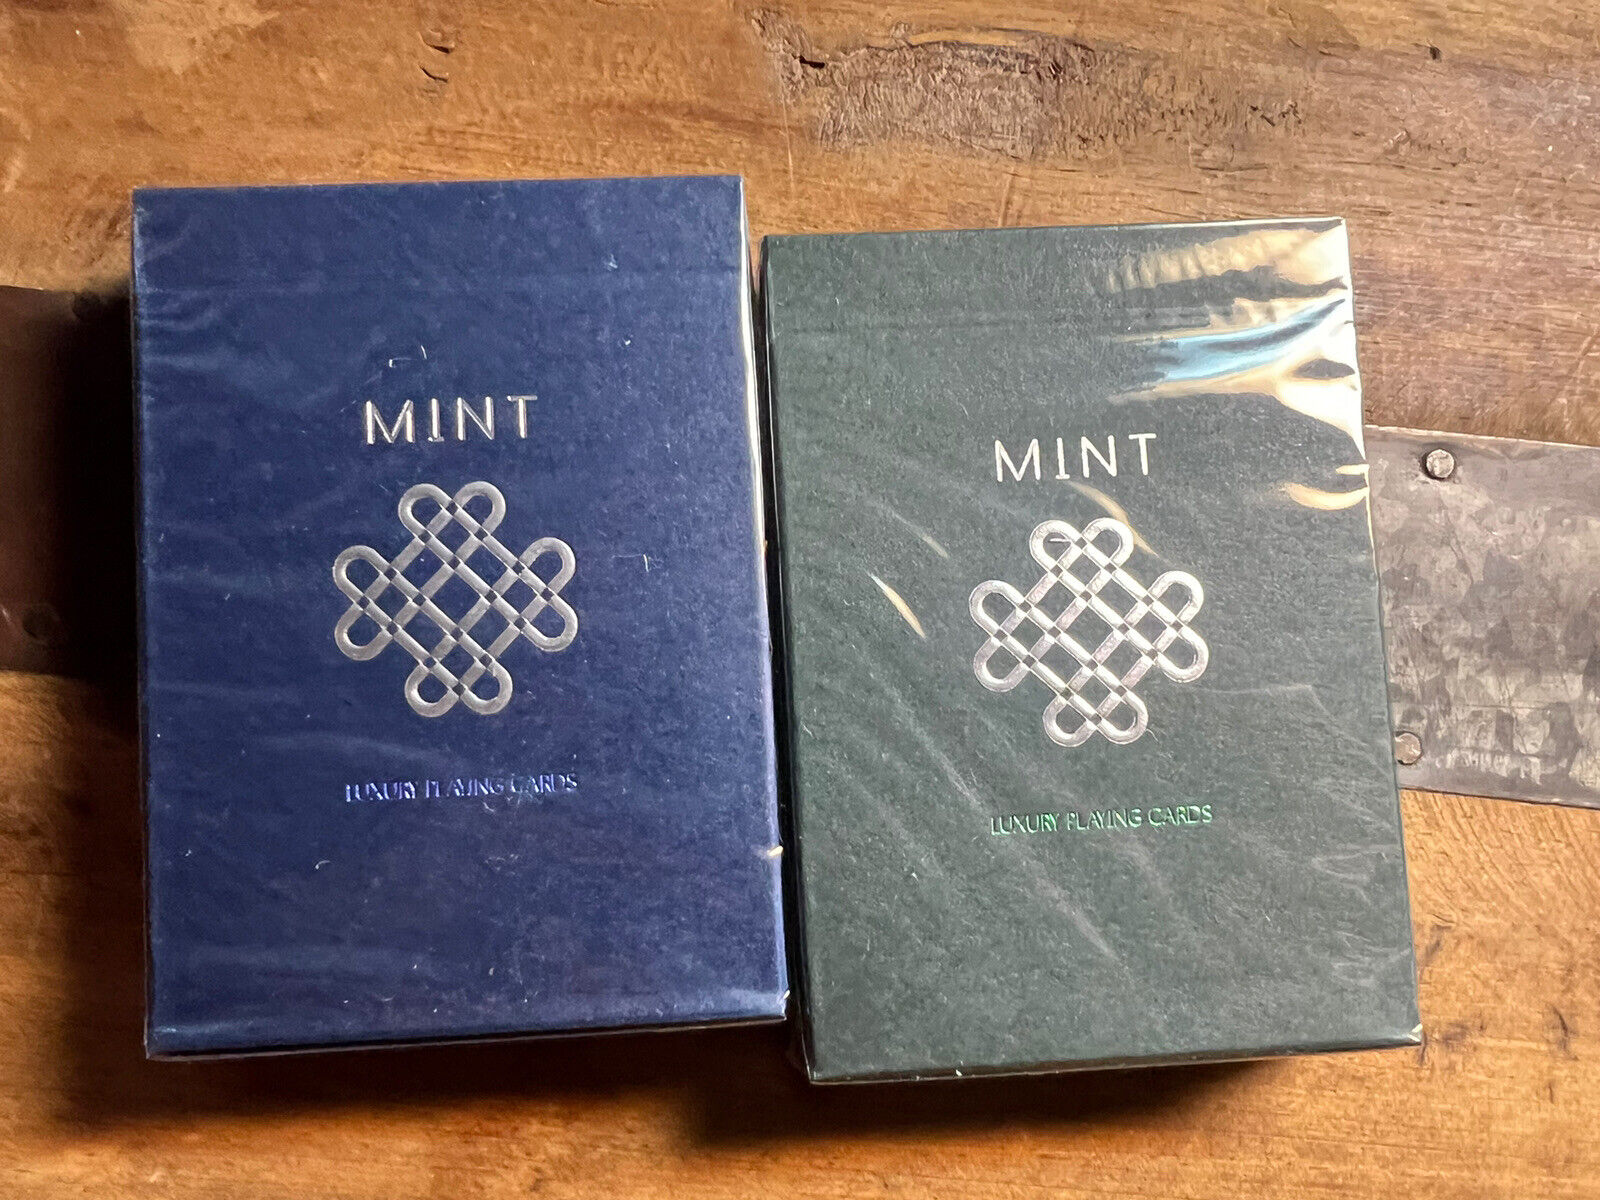 Mint 2 playing card decks from 52Kards - Blueberry & Cucumber sealed 8️⃣🍀